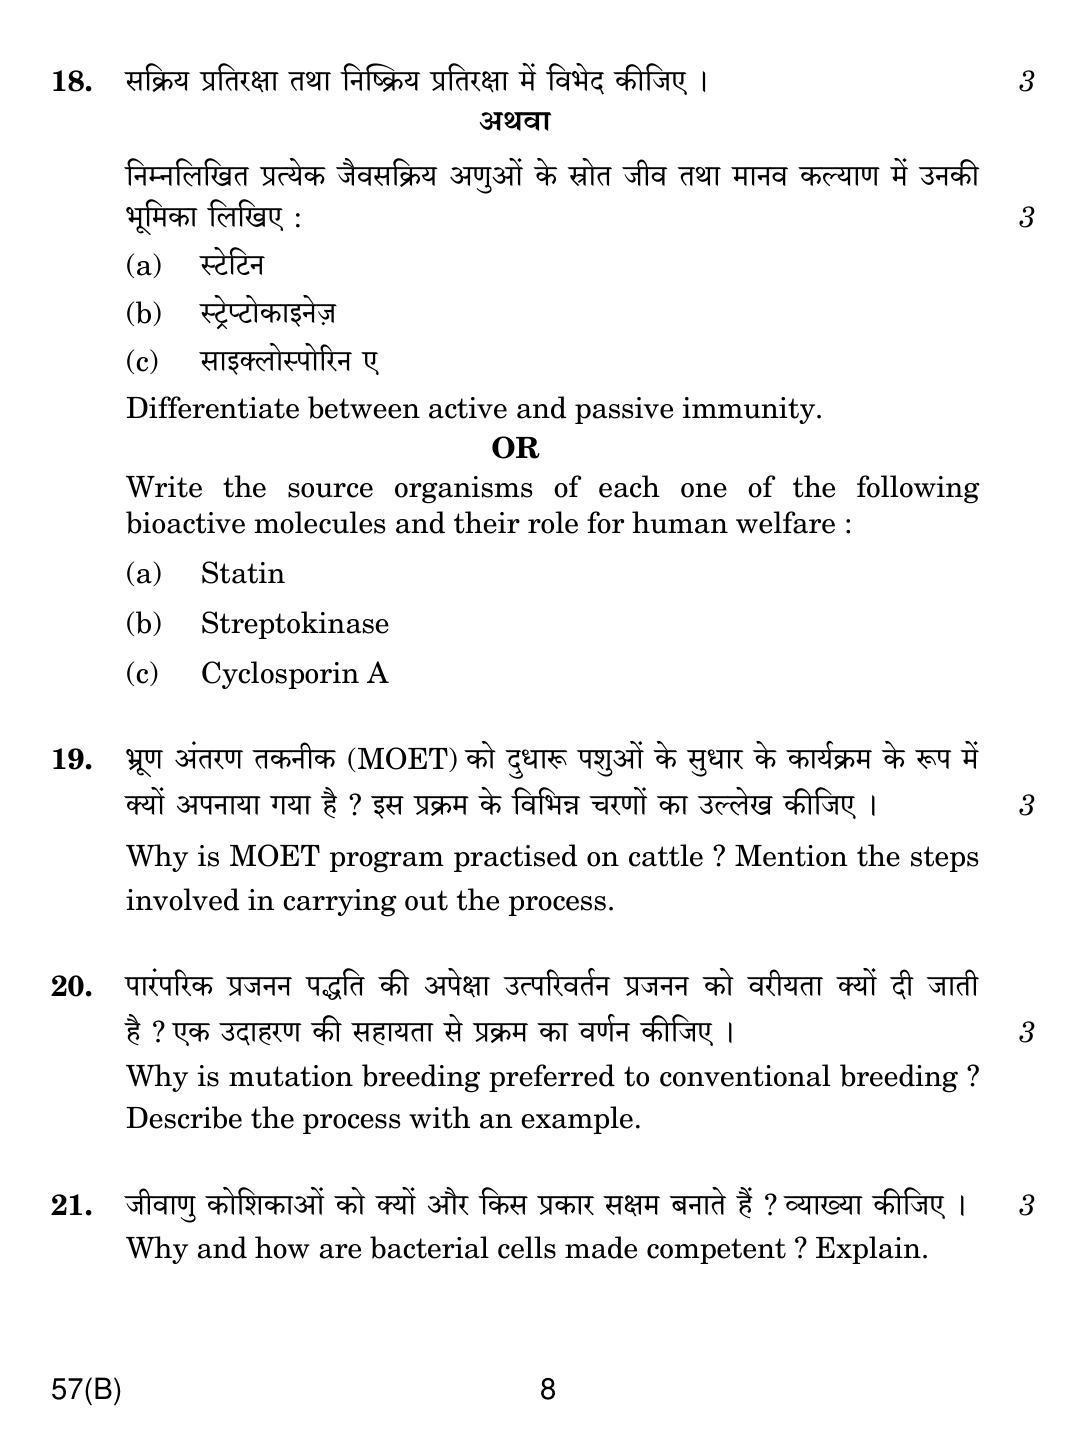 CBSE Class 12 57(B) BIOLOGY 2019 Compartment Question Paper - Page 8